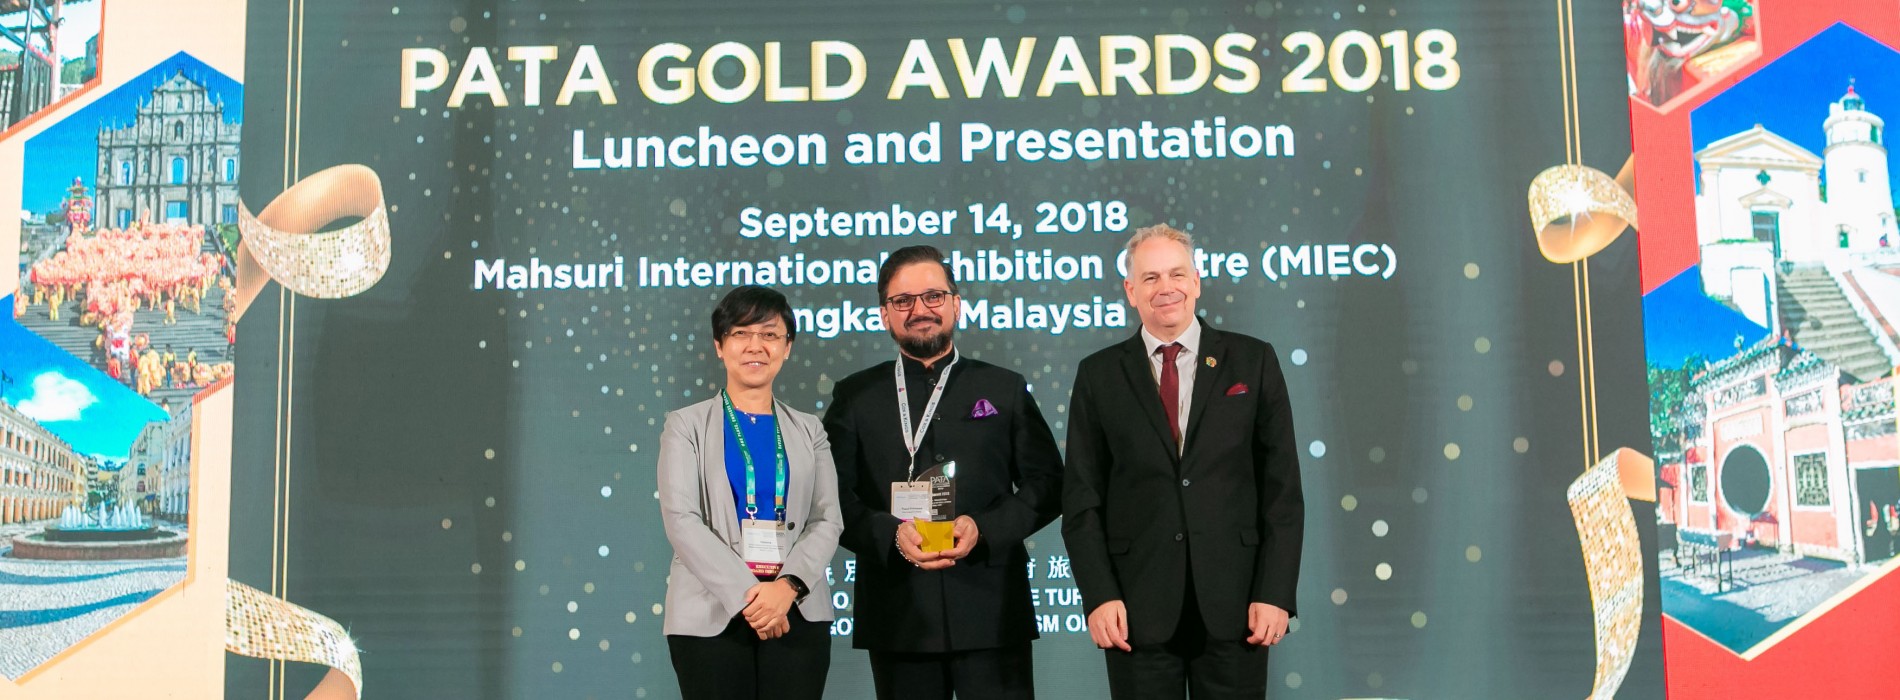 Cox & Kings bags PATA Gold Award for its Travel Brochure